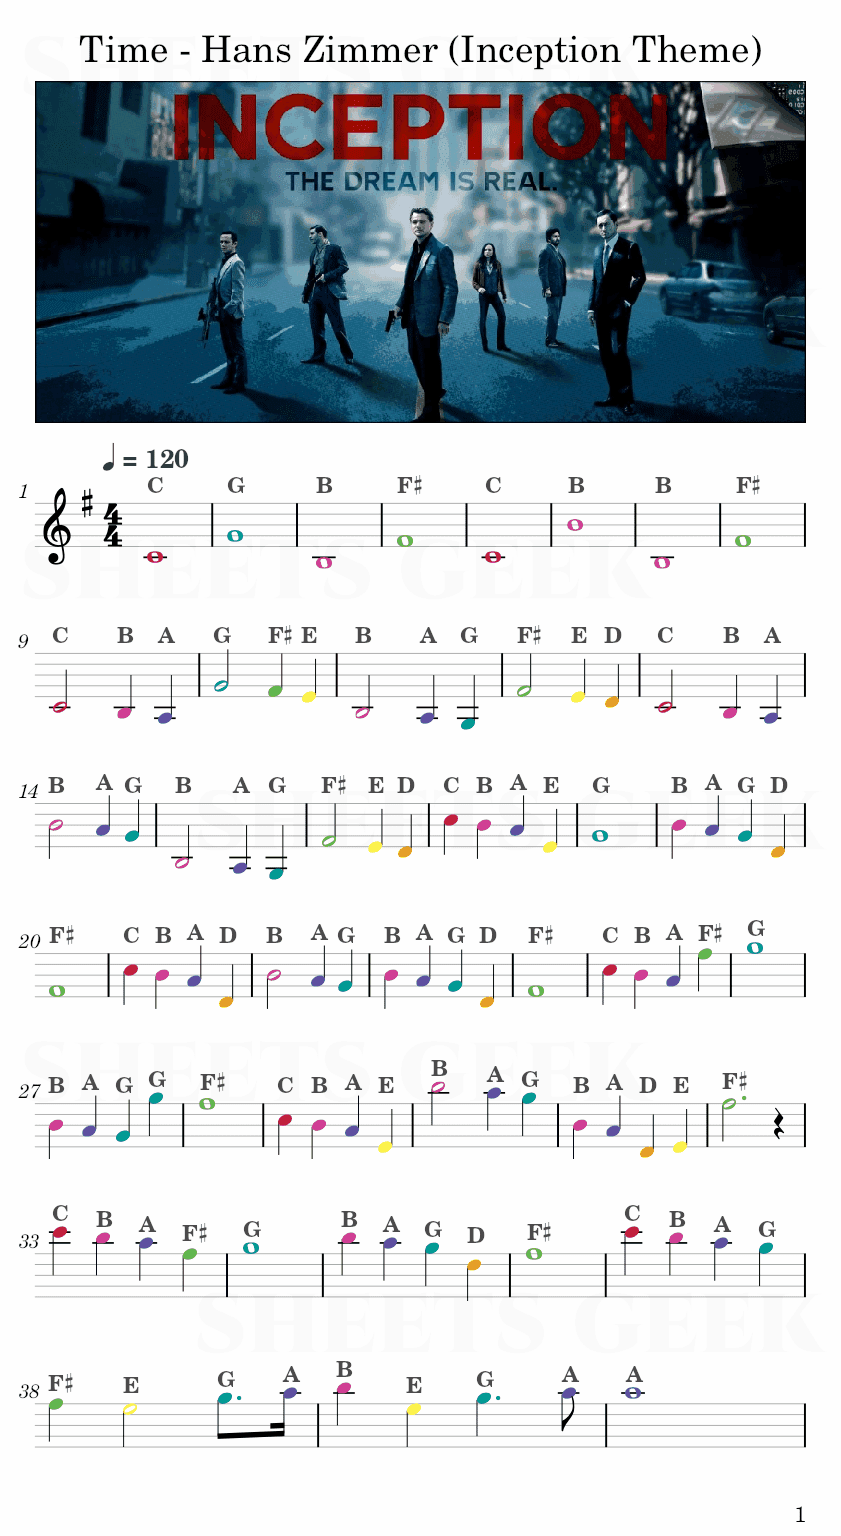 Time - Hans Zimmer (Inception Theme) Easy Sheet Music Free for piano, keyboard, flute, violin, sax, cello page 1